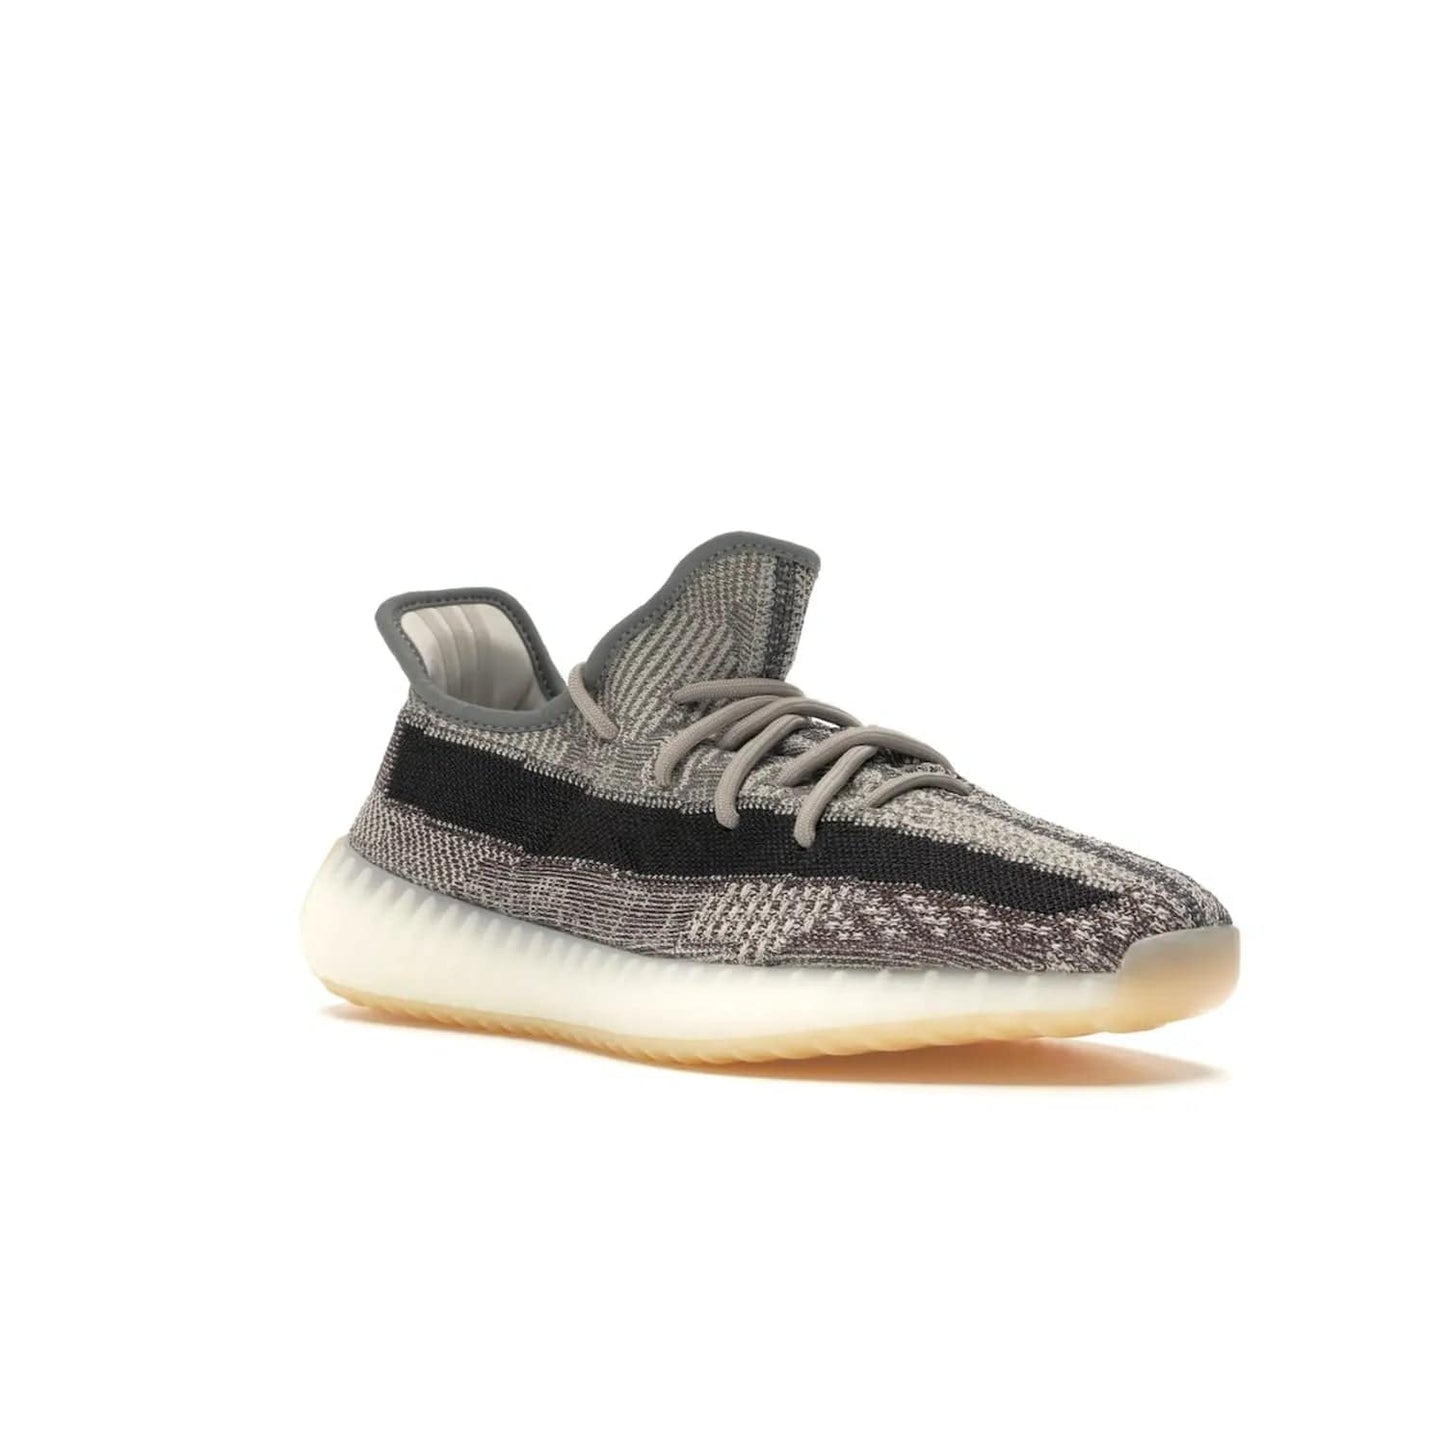 adidas Yeezy Boost 350 V2 Zyon - Image 5 - Only at www.BallersClubKickz.com - Step up your style game with the adidas Yeezy Boost 350 V2 Zyon. This sleek sneaker features a Primeknit upper, dark side stripe, translucent Boost sole, and creamy white interior providing style and comfort. Get them now!